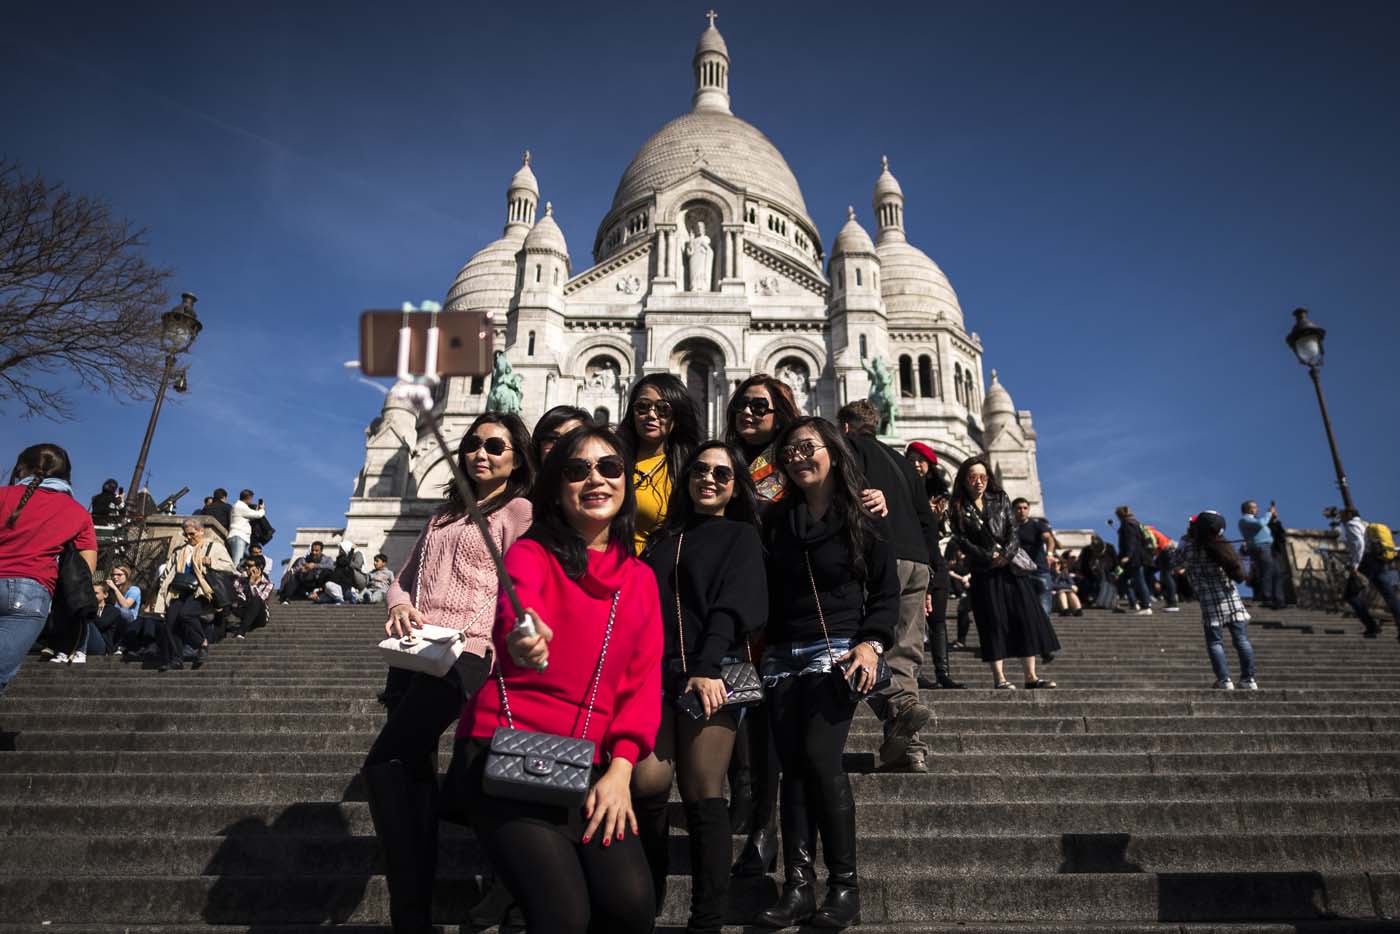 (FILES) This file photo taken on March 30, 2017 shows tourists taking selfie pictures in front of the Sacre Coeur basilica ontop of the Paris landmark district of Montmartre in Paris. After a decline in 2016 due to the terror attacks in Paris and Nice, tourism in Paris and Ile de France is in much better shape in the first half of 2017, with 1,5 million tourists and 3,3 million overnight stays more than a year ago. / AFP PHOTO / Lionel BONAVENTURE